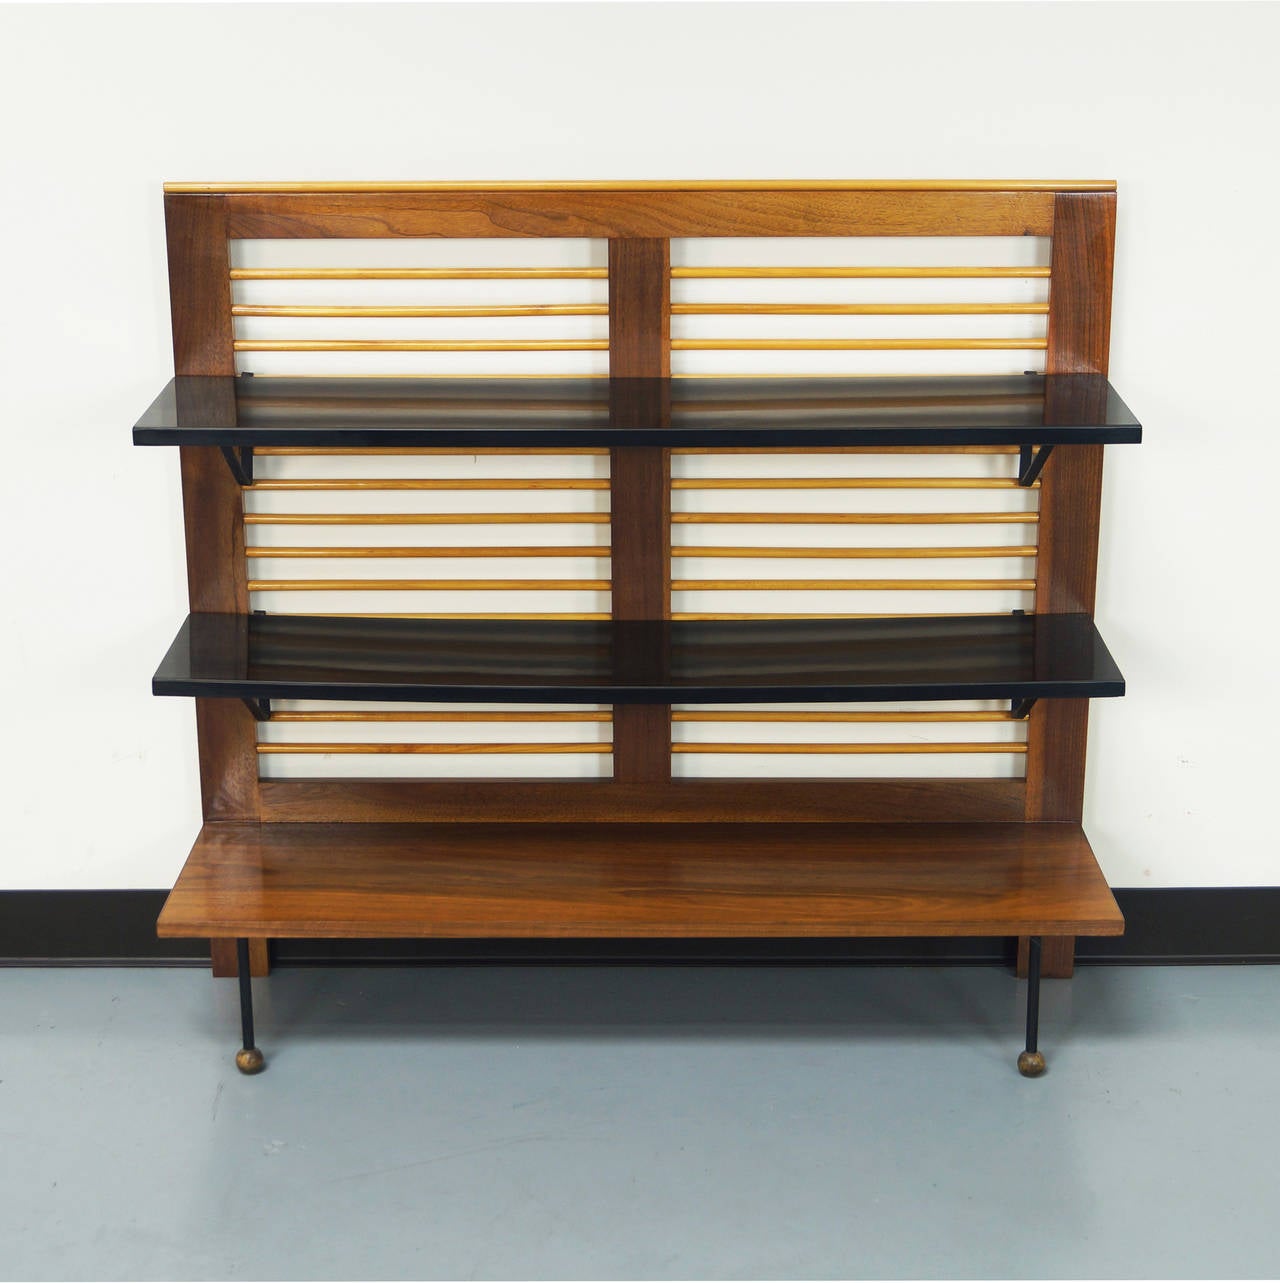 This rare vintage bookshelf / room divider was designed by Greta M. Grossman for Glenn of California. Original finish.

A similar example was being exhibited in 